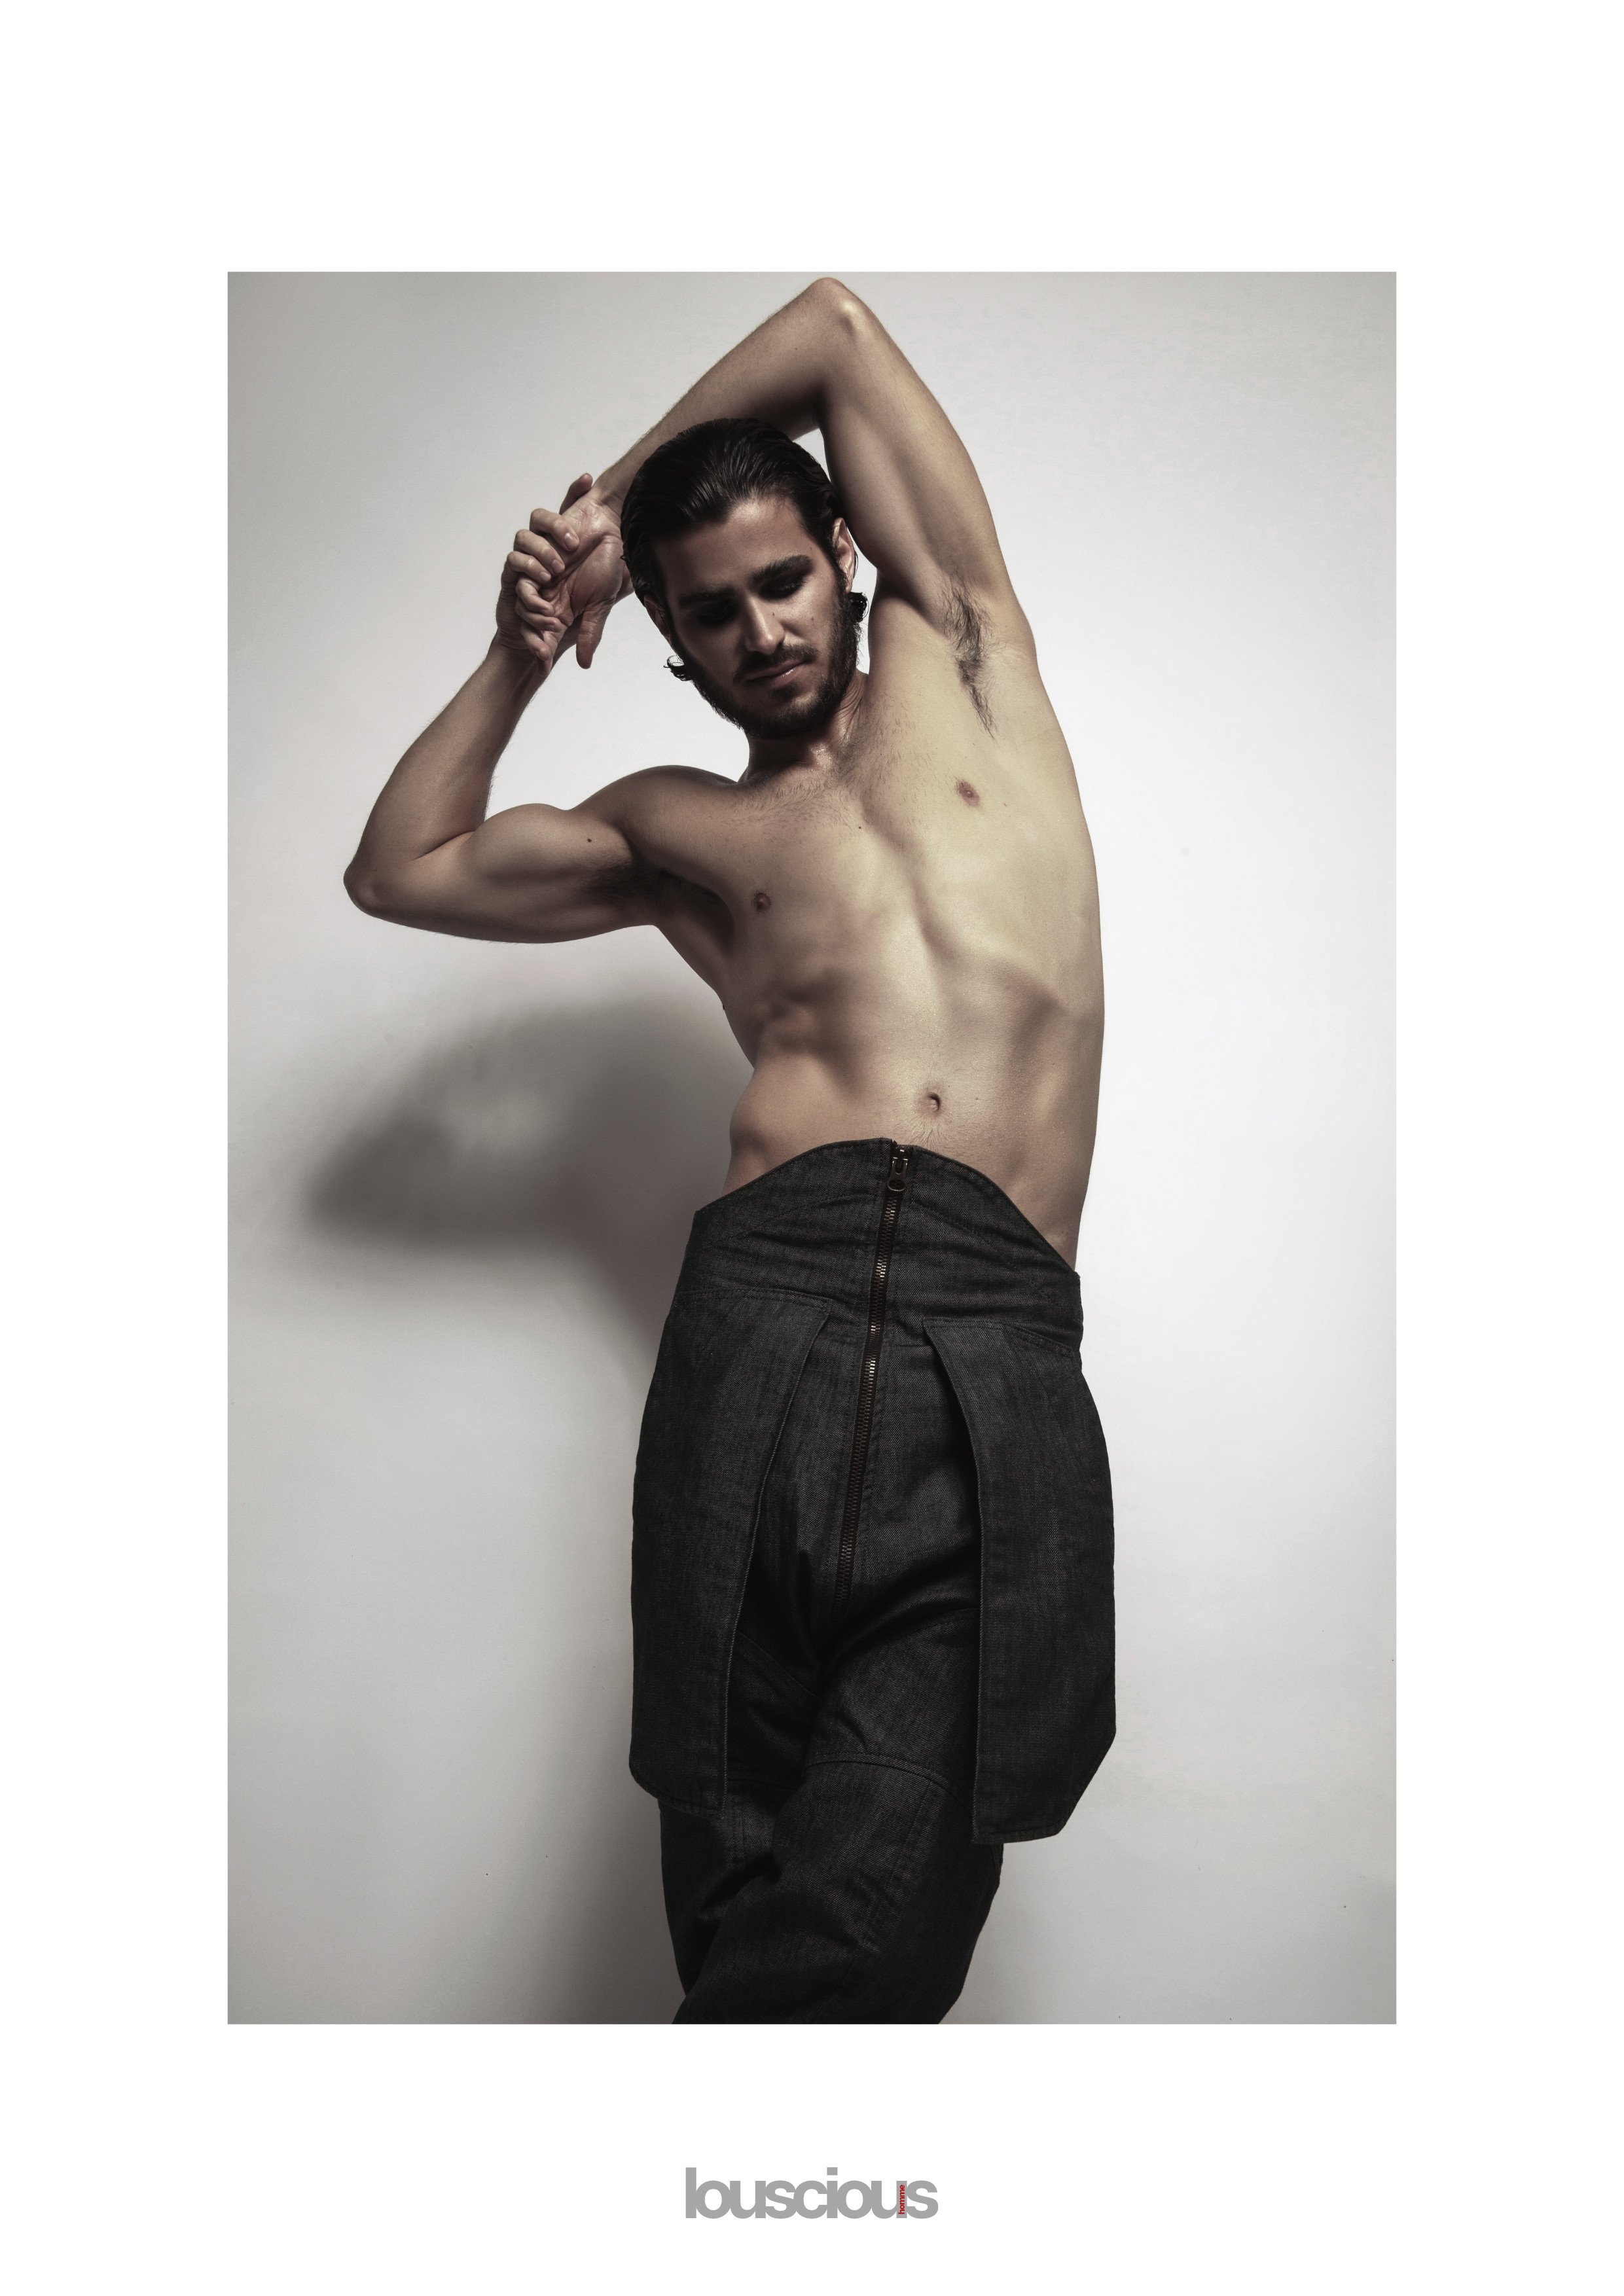 Louscious Homme Online Editorial - He´s the only one by Juan Carlos Canahuiri  _14.jpg